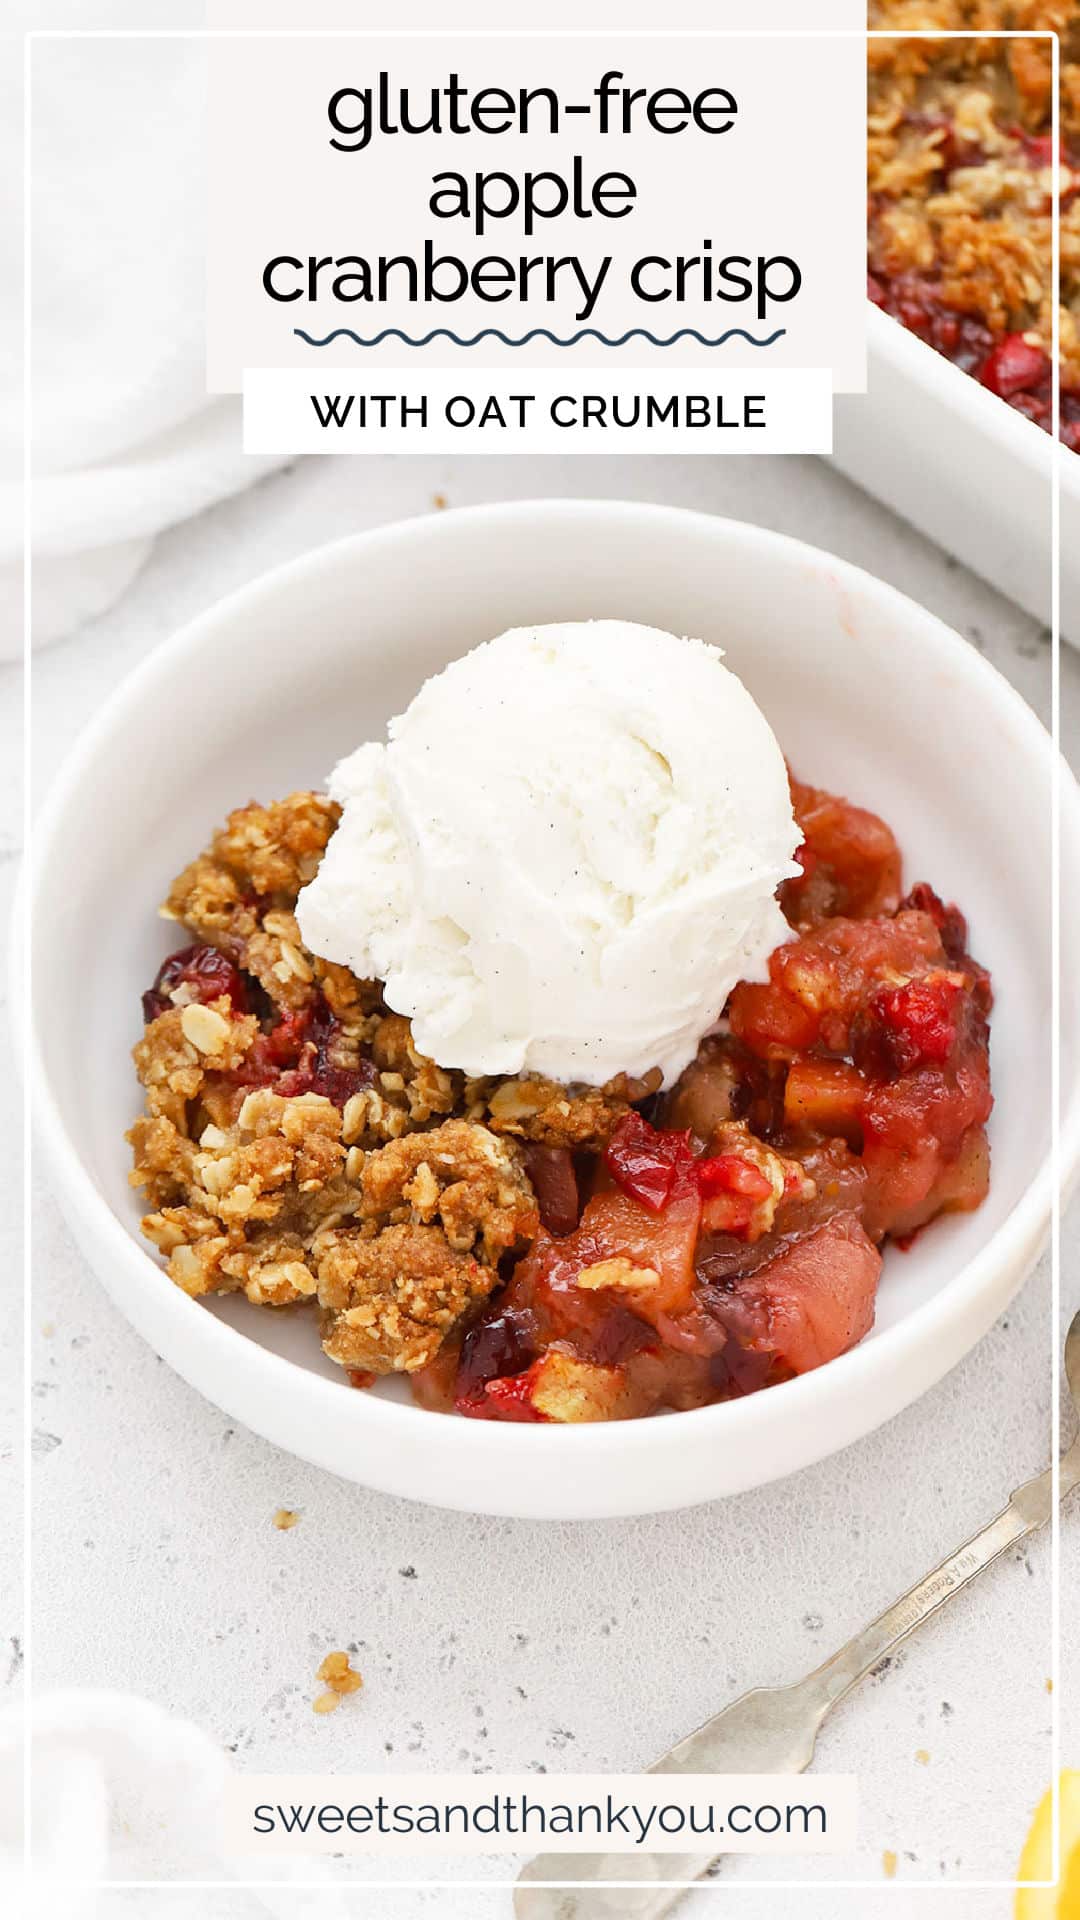 This easy Gluten-Free Apple Cranberry Crisp recipe is the perfect dessert for the holiday season. / gluten-free cranberry crisp recipe / gluten-free cranberry crumble recipe / gluten-free thanksgiving dessert / gluten-free christmas dessert / gluten-free cranberry dessert / gluten-free cranberry apple crisp / gluten free cranberry recipe